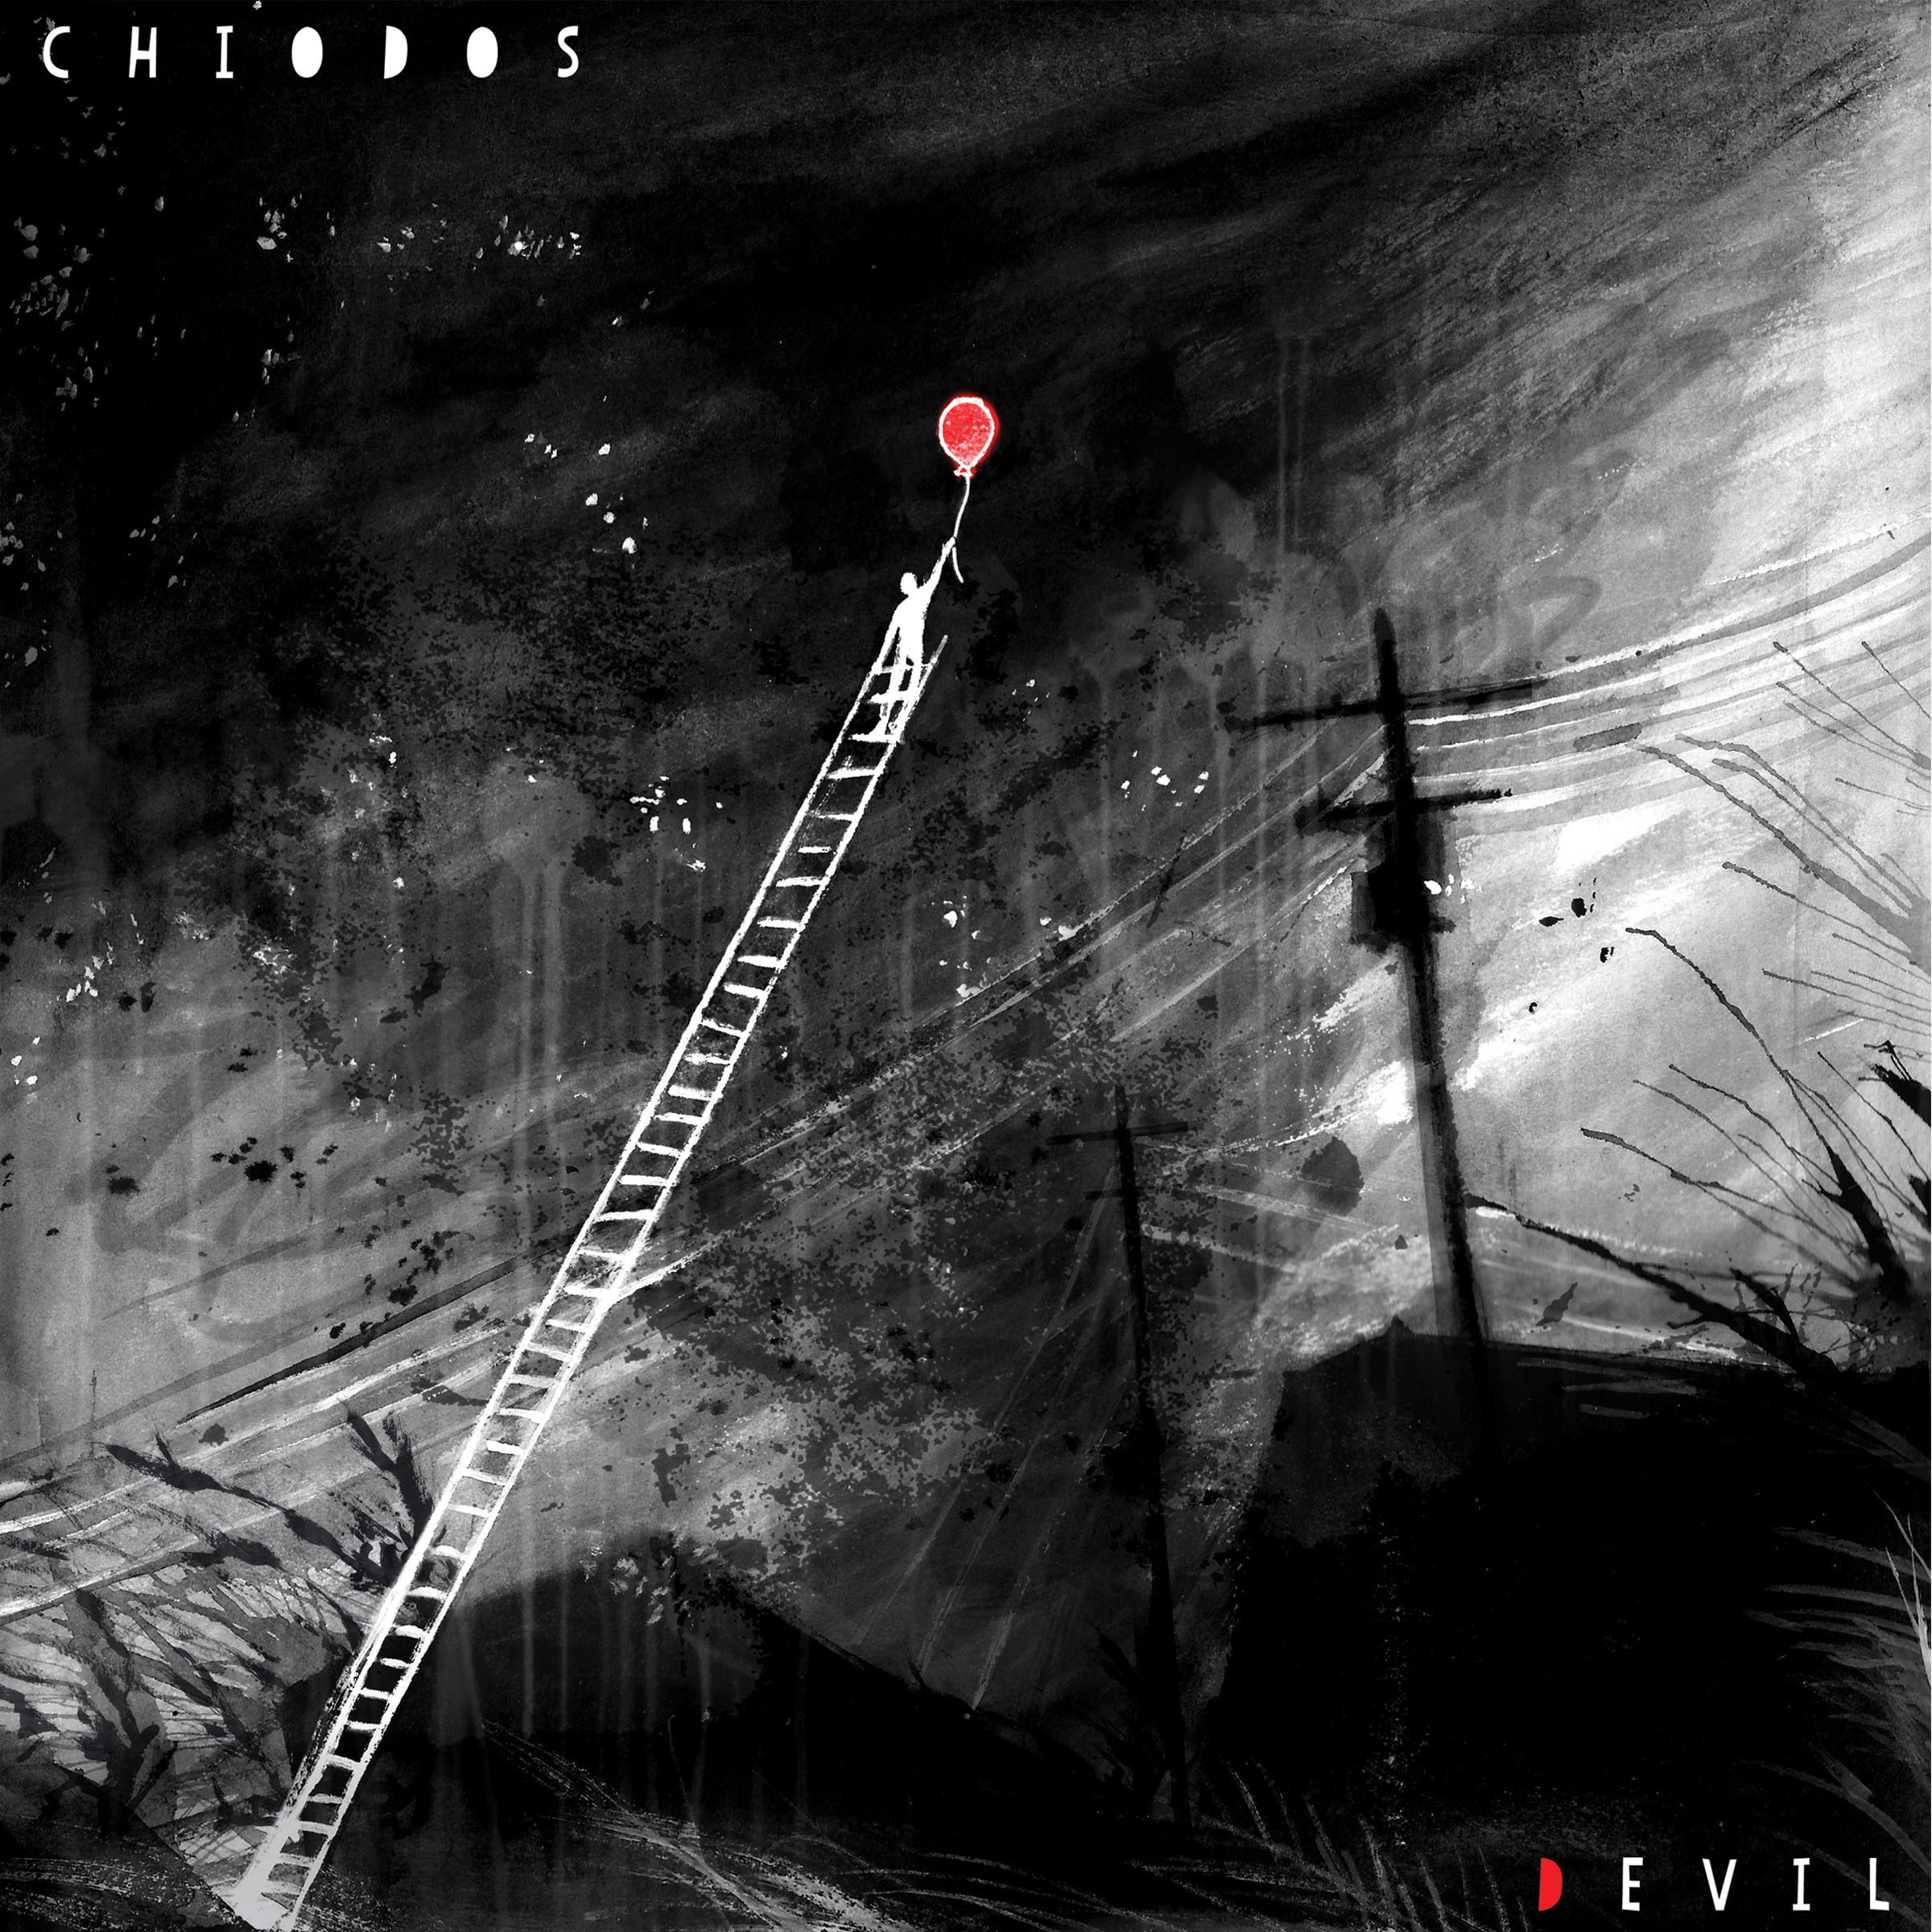 Chiodos To Release Devil On April 1st Through Drk Lght Records